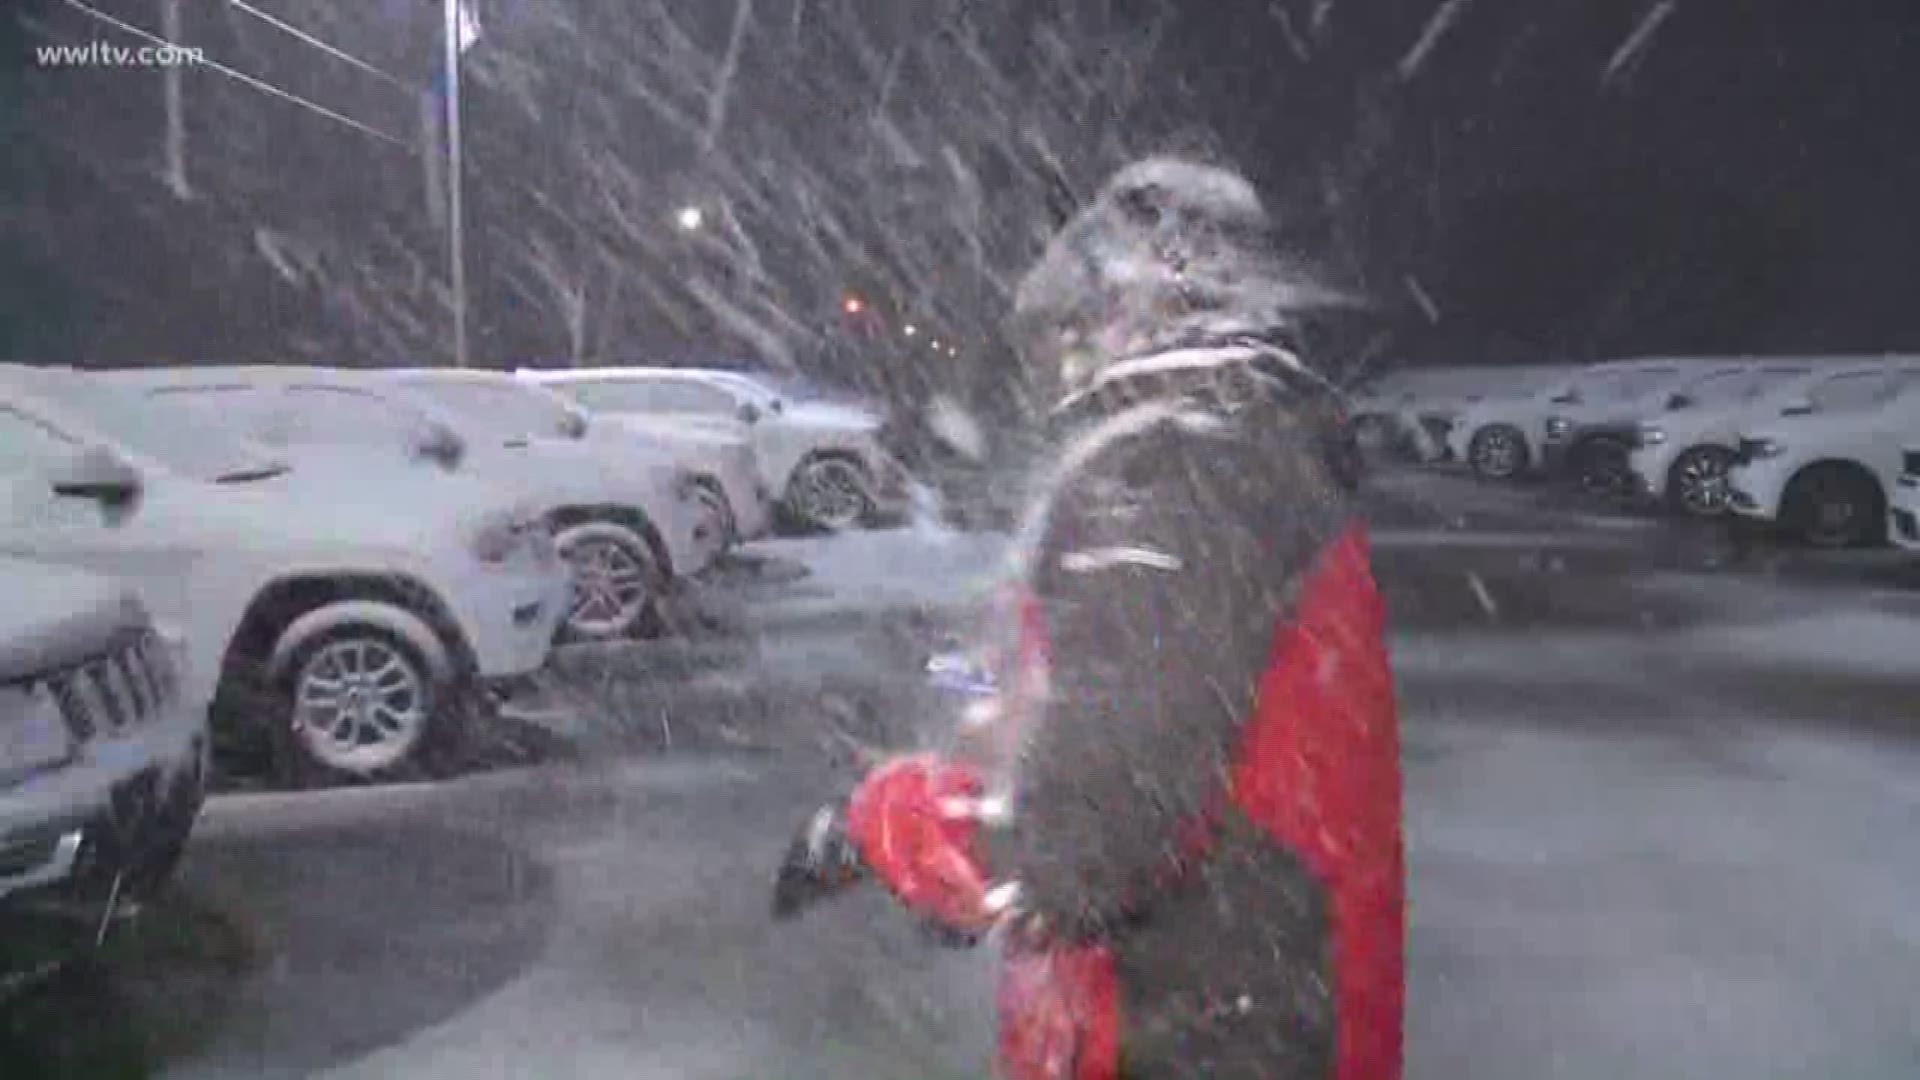 Reporter Duke Carter is getting slammed by snow and snowballs in Hammond.